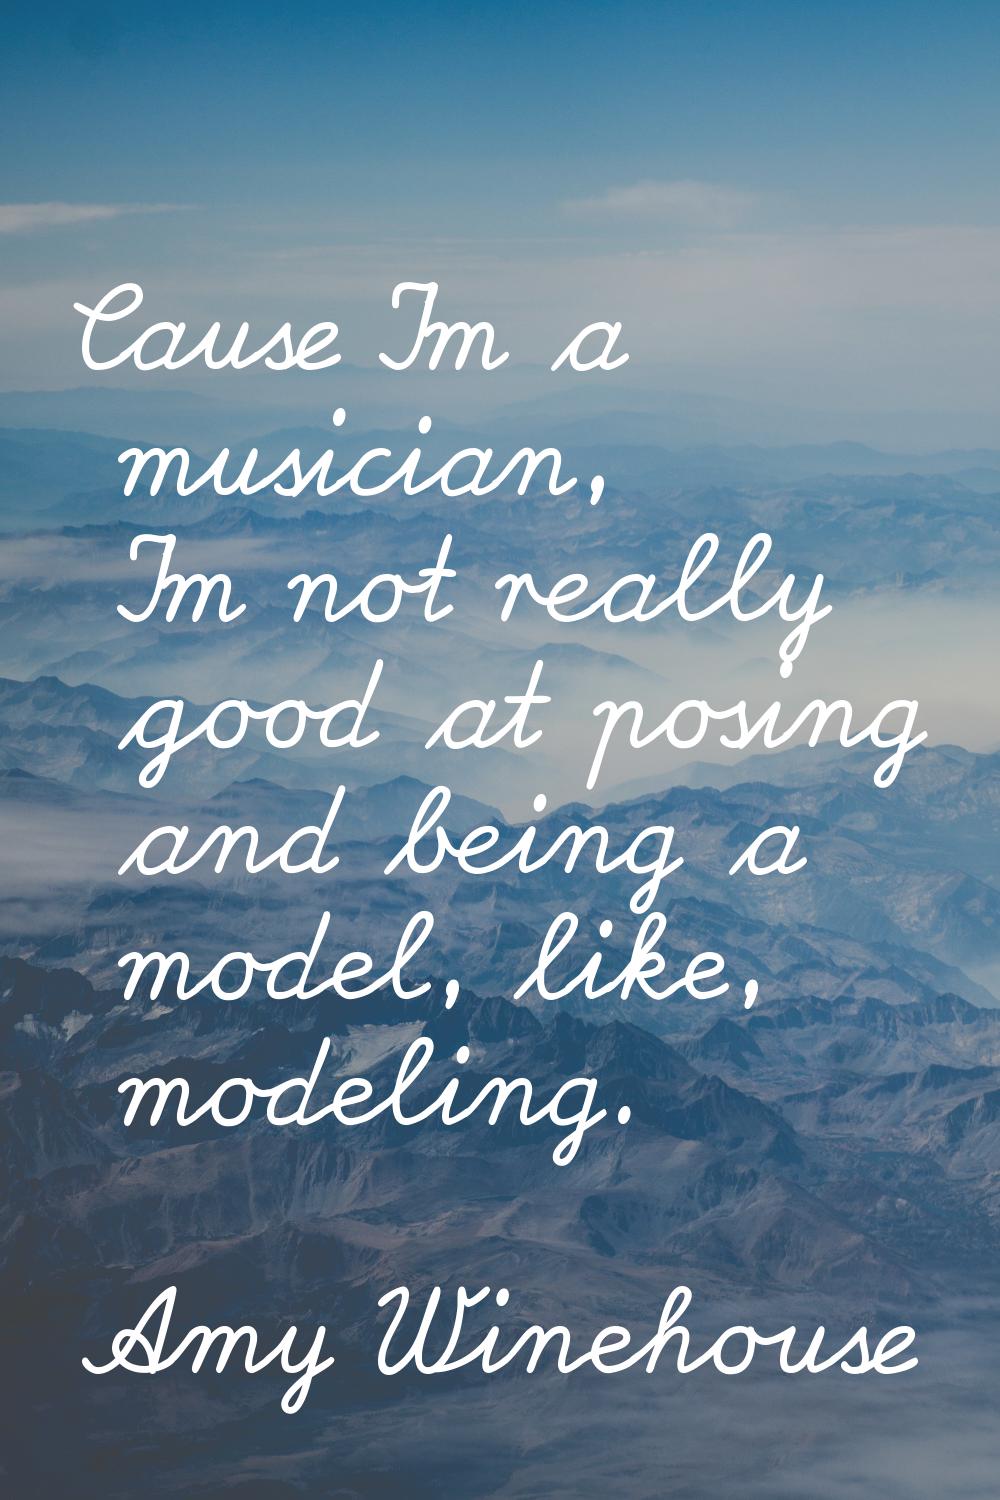 Cause I'm a musician, I'm not really good at posing and being a model, like, modeling.